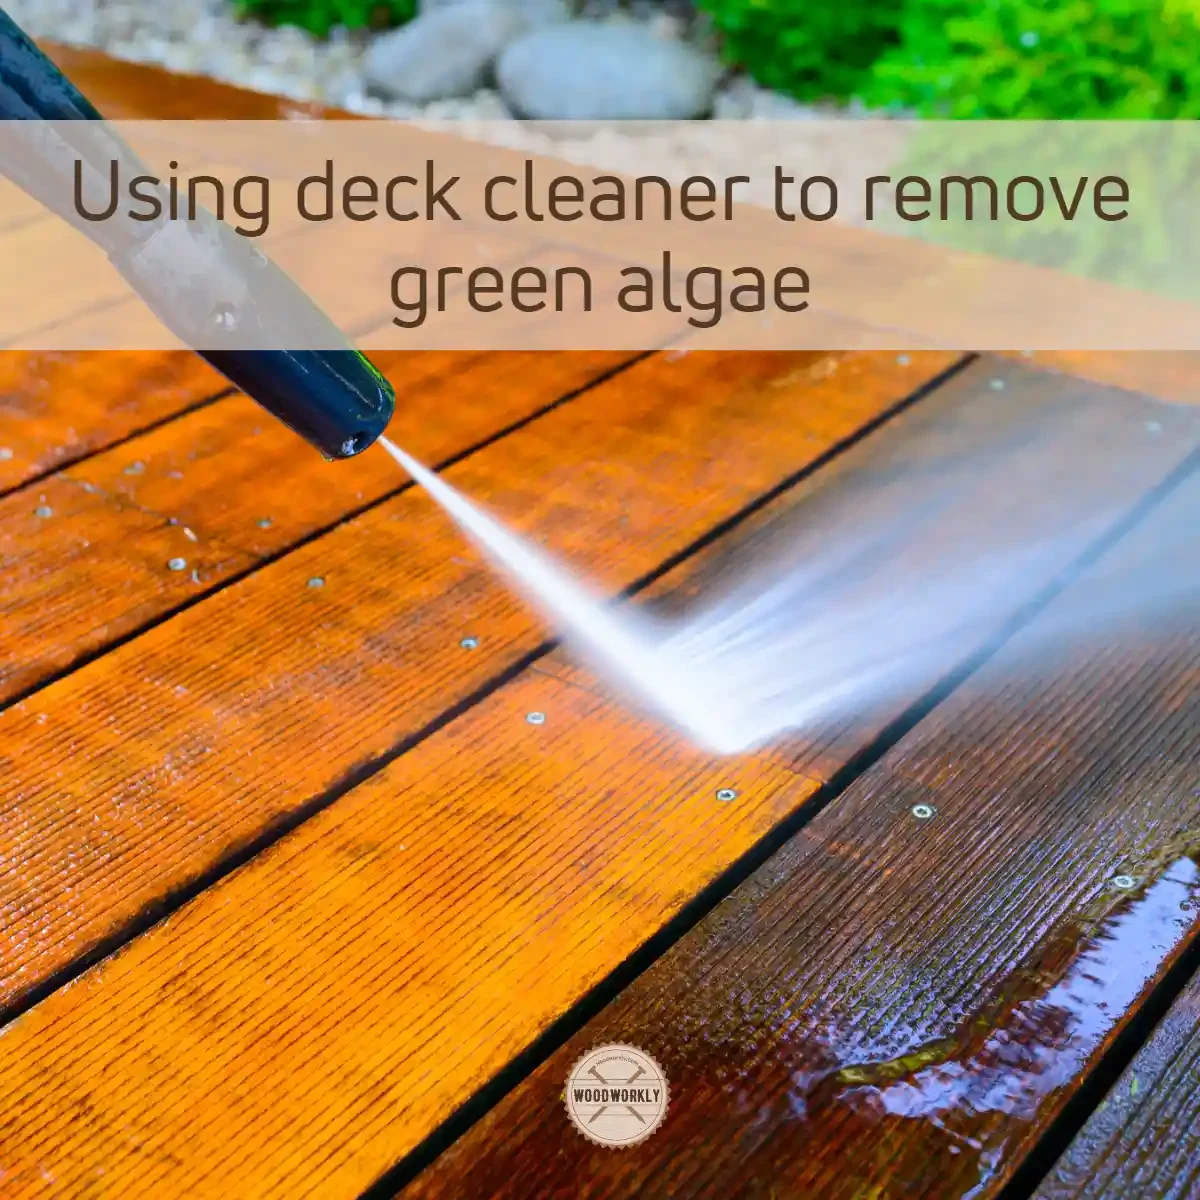 Using deck cleaner to remove green algae